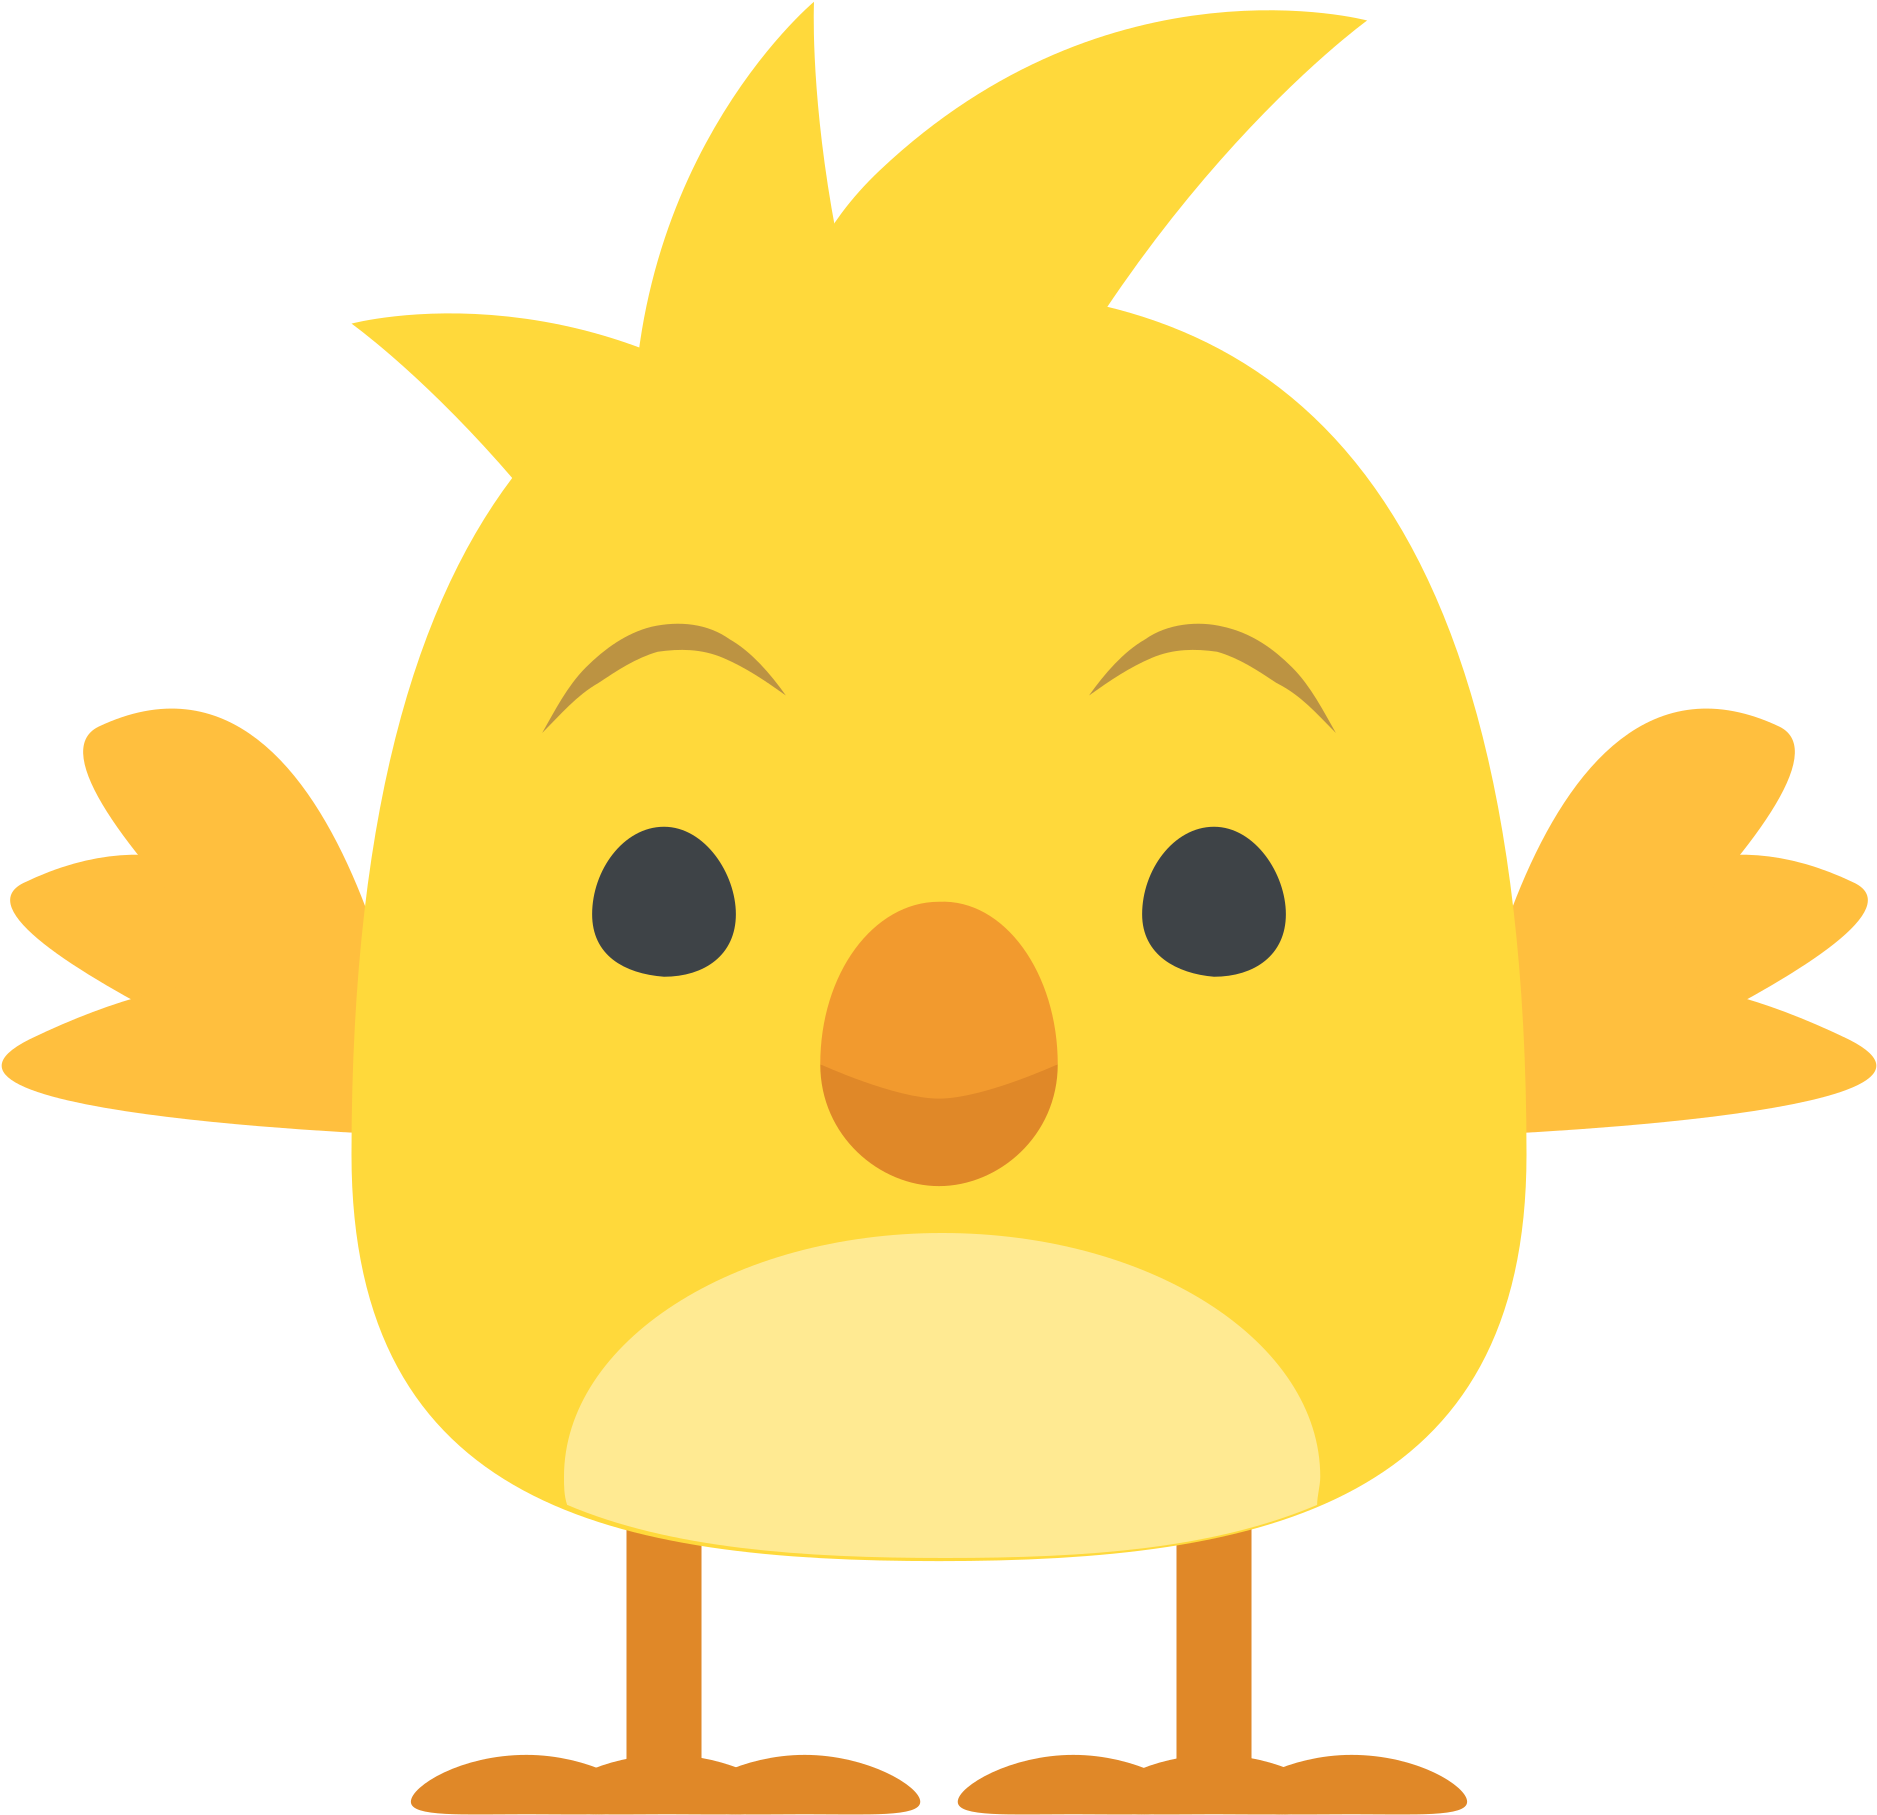 Front-facing Baby Chick - Vegan For The Animals Stickers (2000x2000)